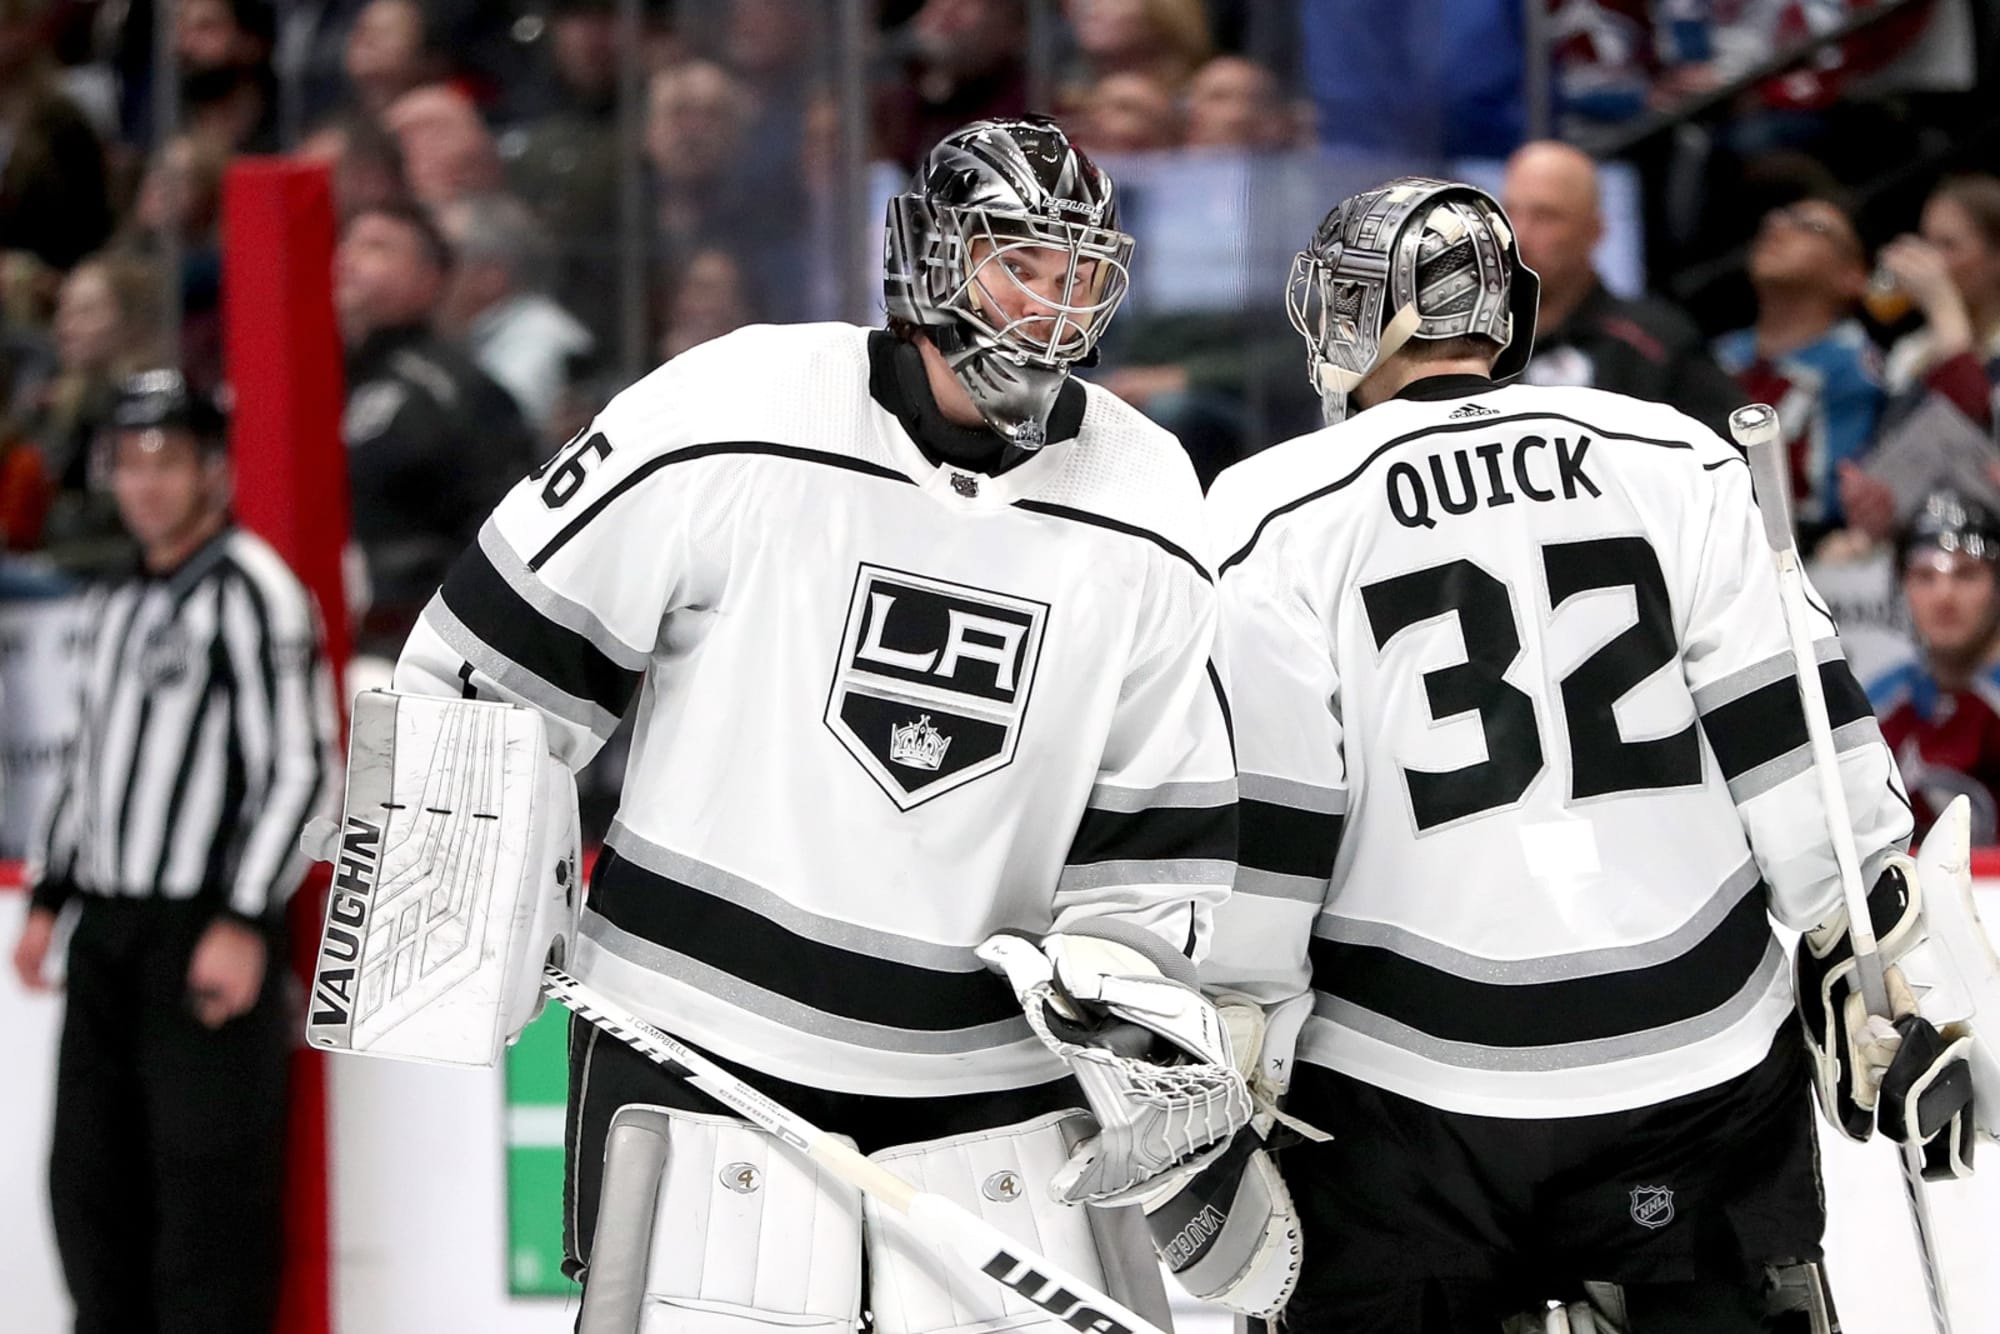 Goaltender Jonathan Quick of the Los Angeles Kings leads his News Photo  - Getty Images